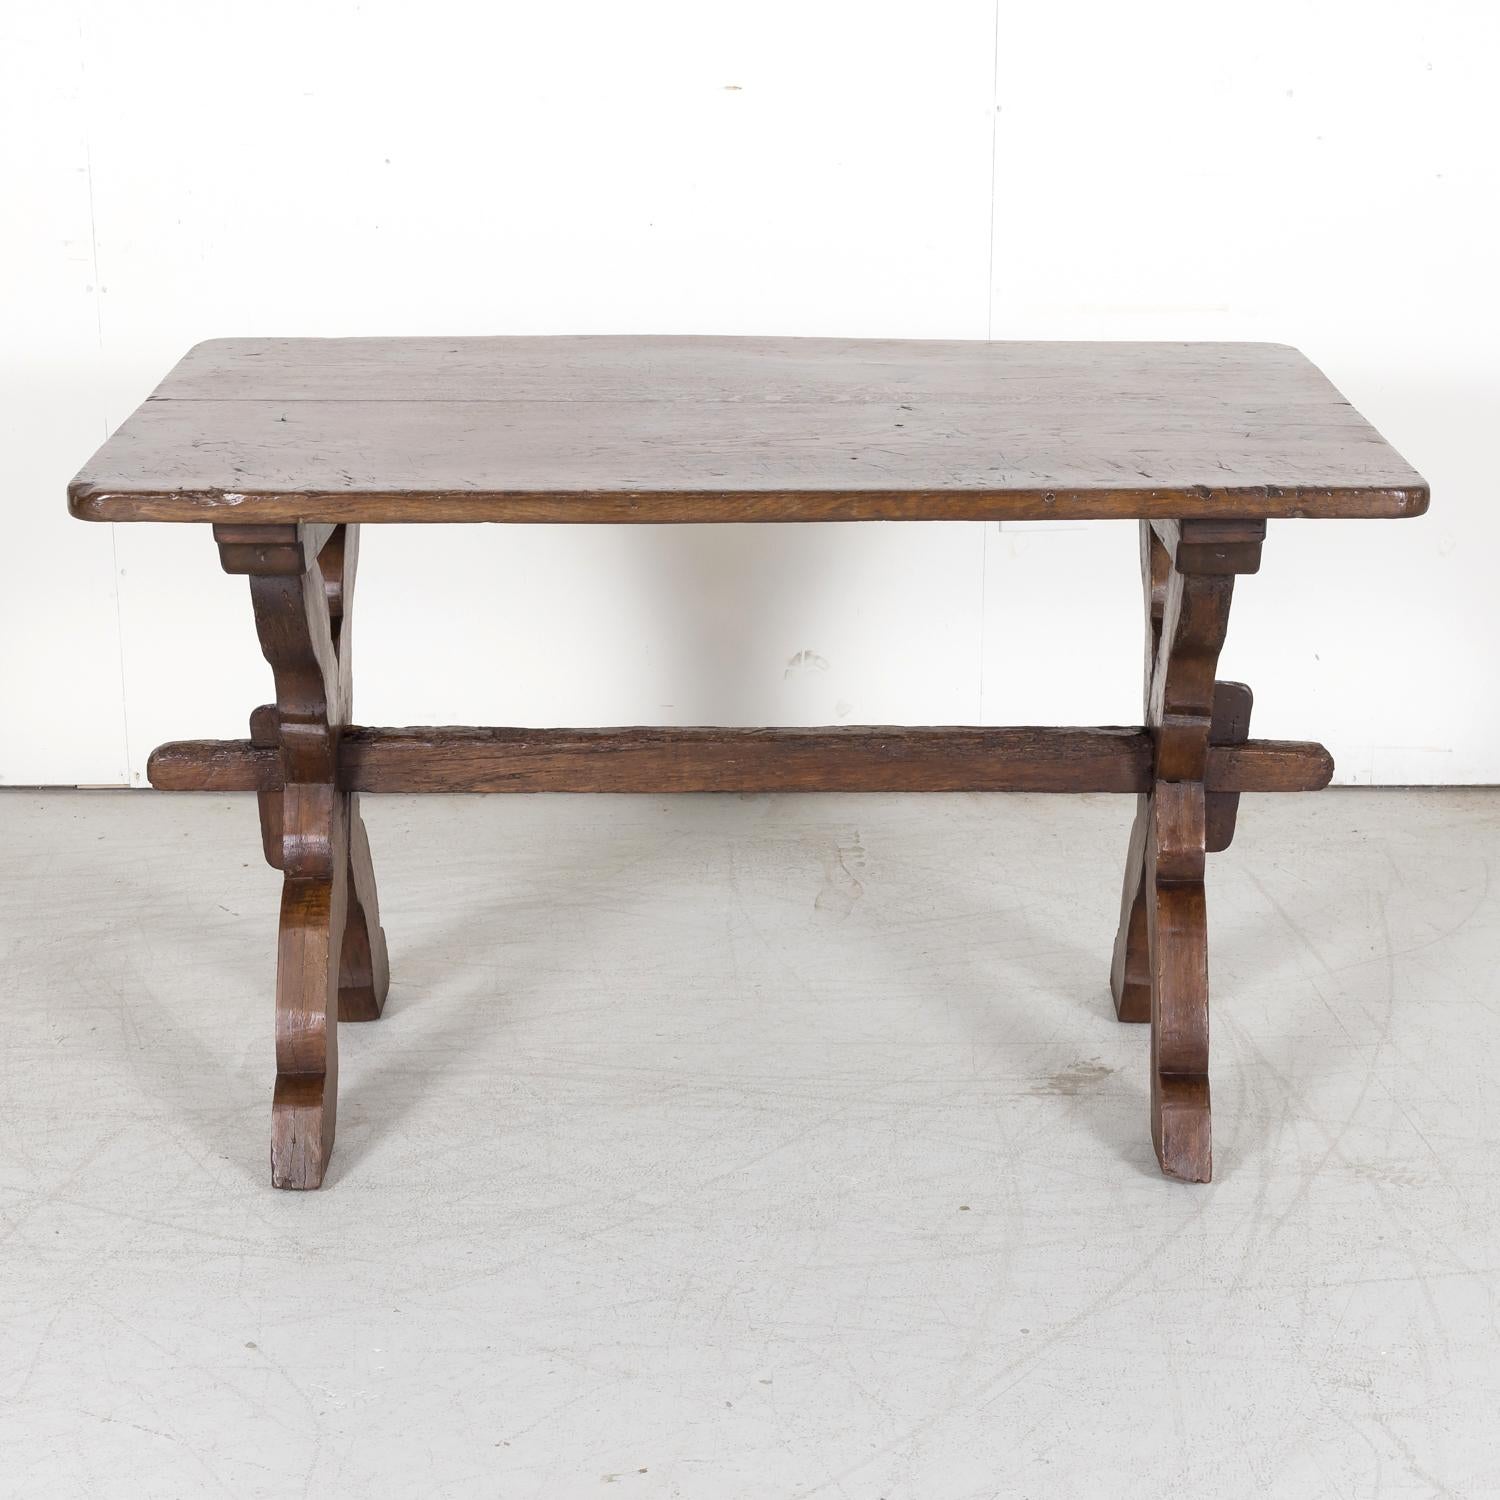 A rustic early 19th century primitive side table handcrafted of solid oak near Tarragona in the Catalan region, circa 1810s, having a rectangular plank top raised on a scalloped X base with a wood stretcher. The beautifully aged patina adds instant